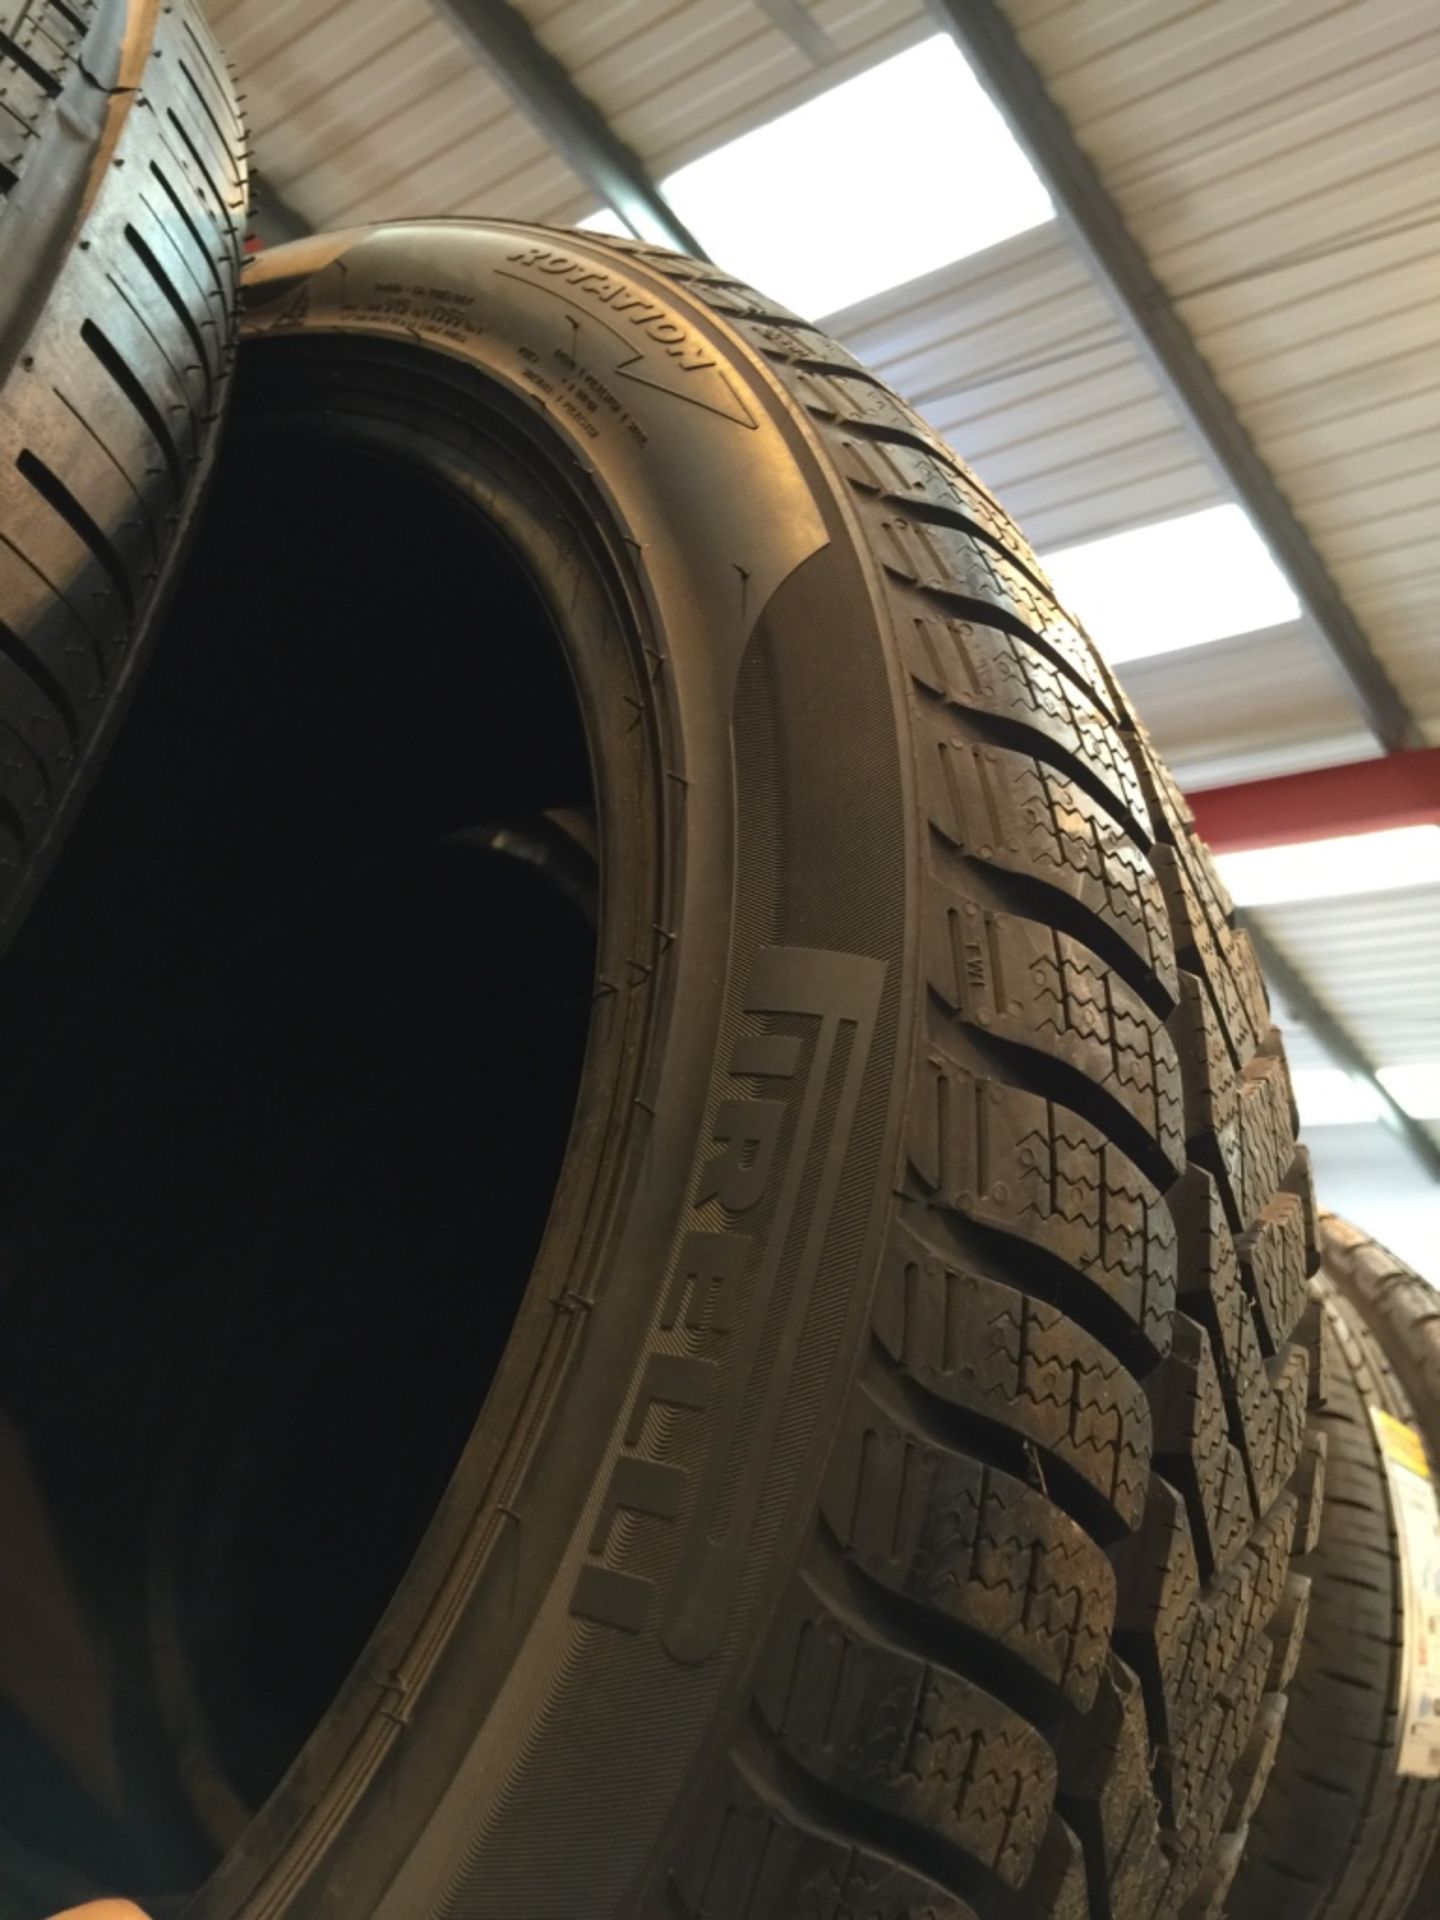 54: Pirelli Tyres Car & 4X4 - Many Large Sizes to include 18,19,21" Please see further Pictures ( - Image 26 of 55